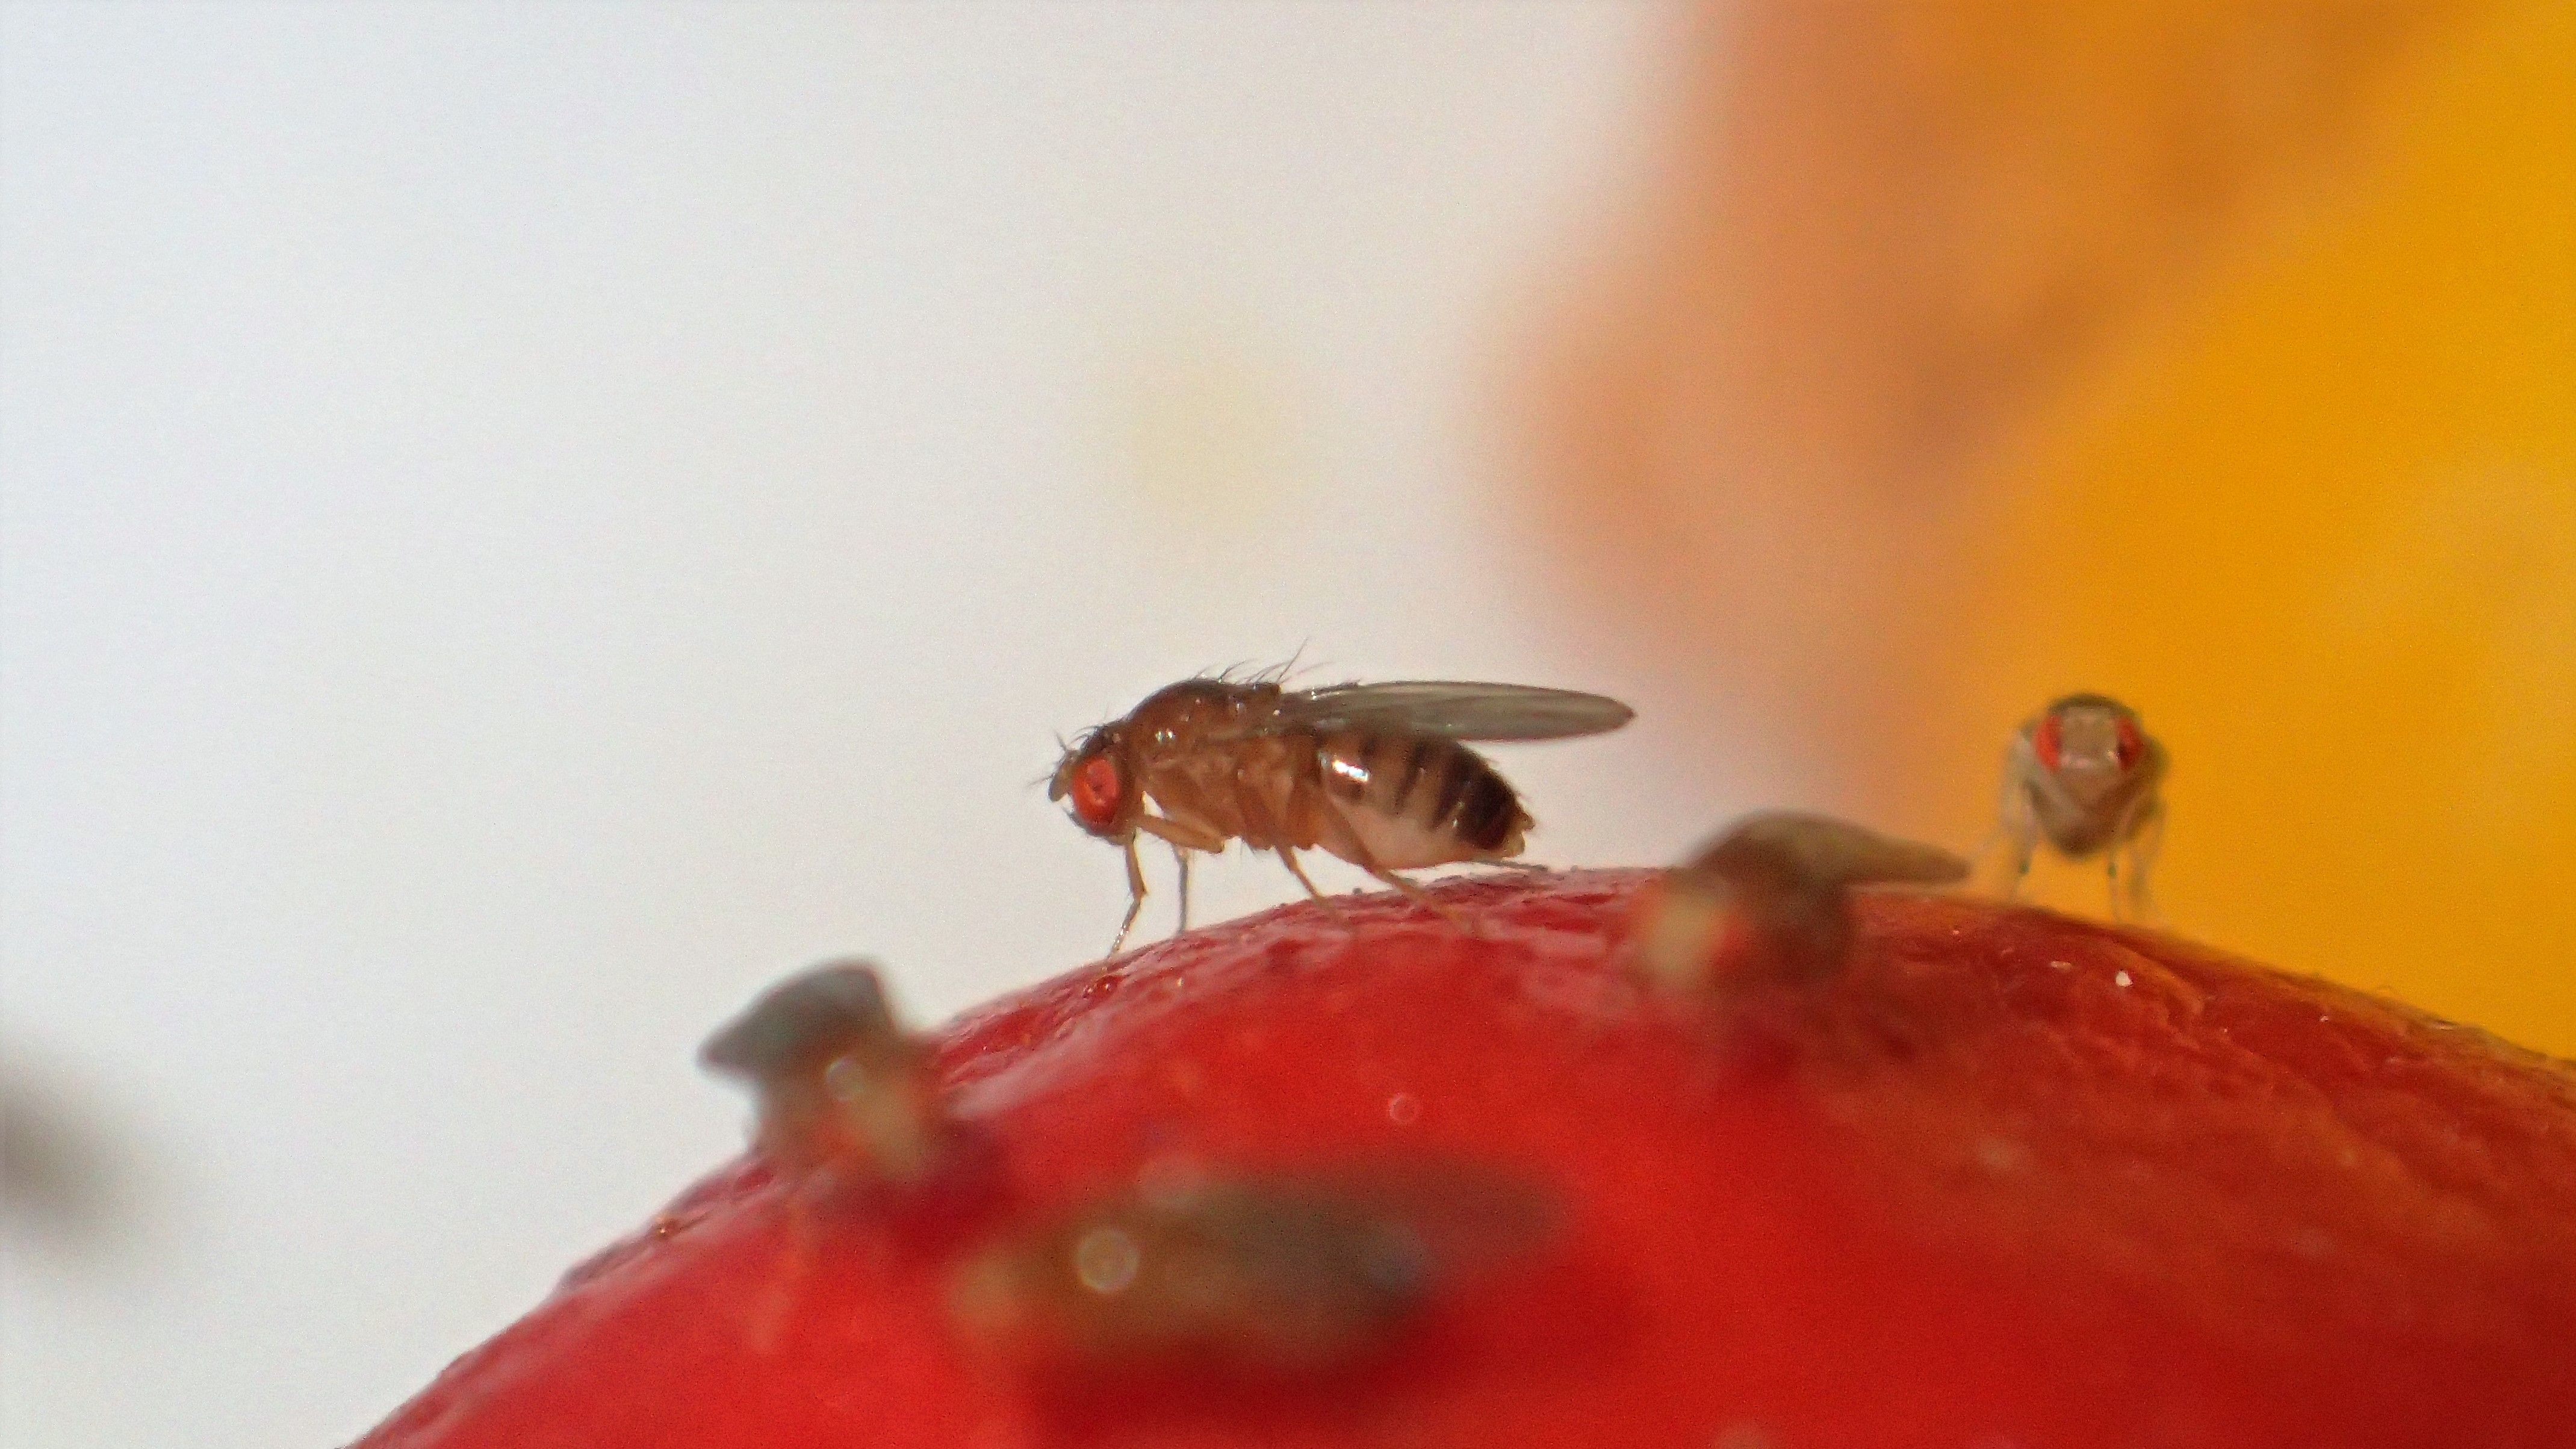 5 Fruit Fly Traps to Get Rid of Fruit Flies Once and for All